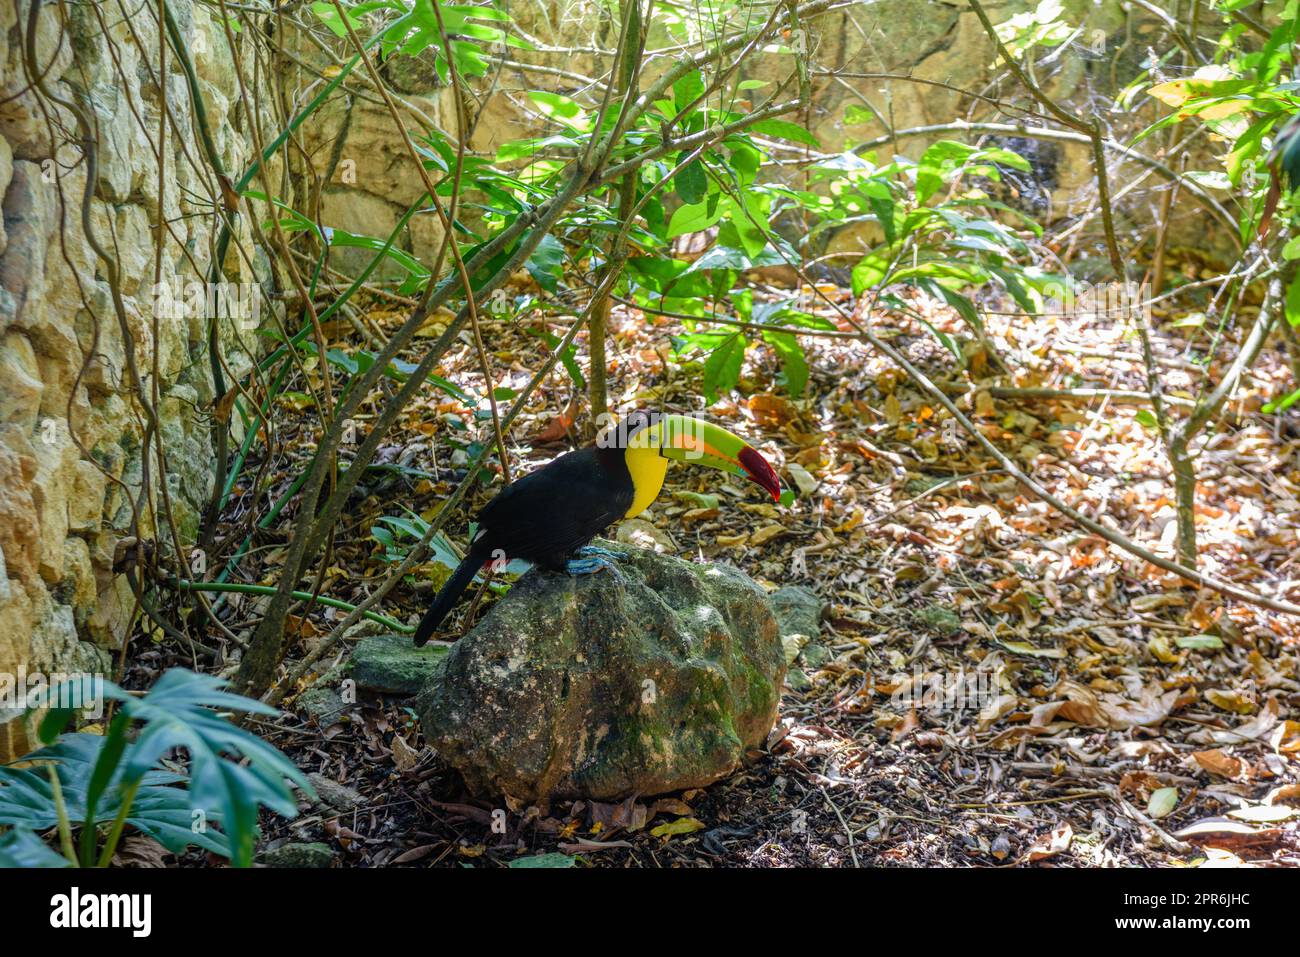 Keel-billed Toucan, Ramphastos sulfuratus, bird with big bill sitting on the branch in the forest, nature travel in central America, Playa del Carmen, Riviera Maya, Yu atan, Mexico Stock Photo